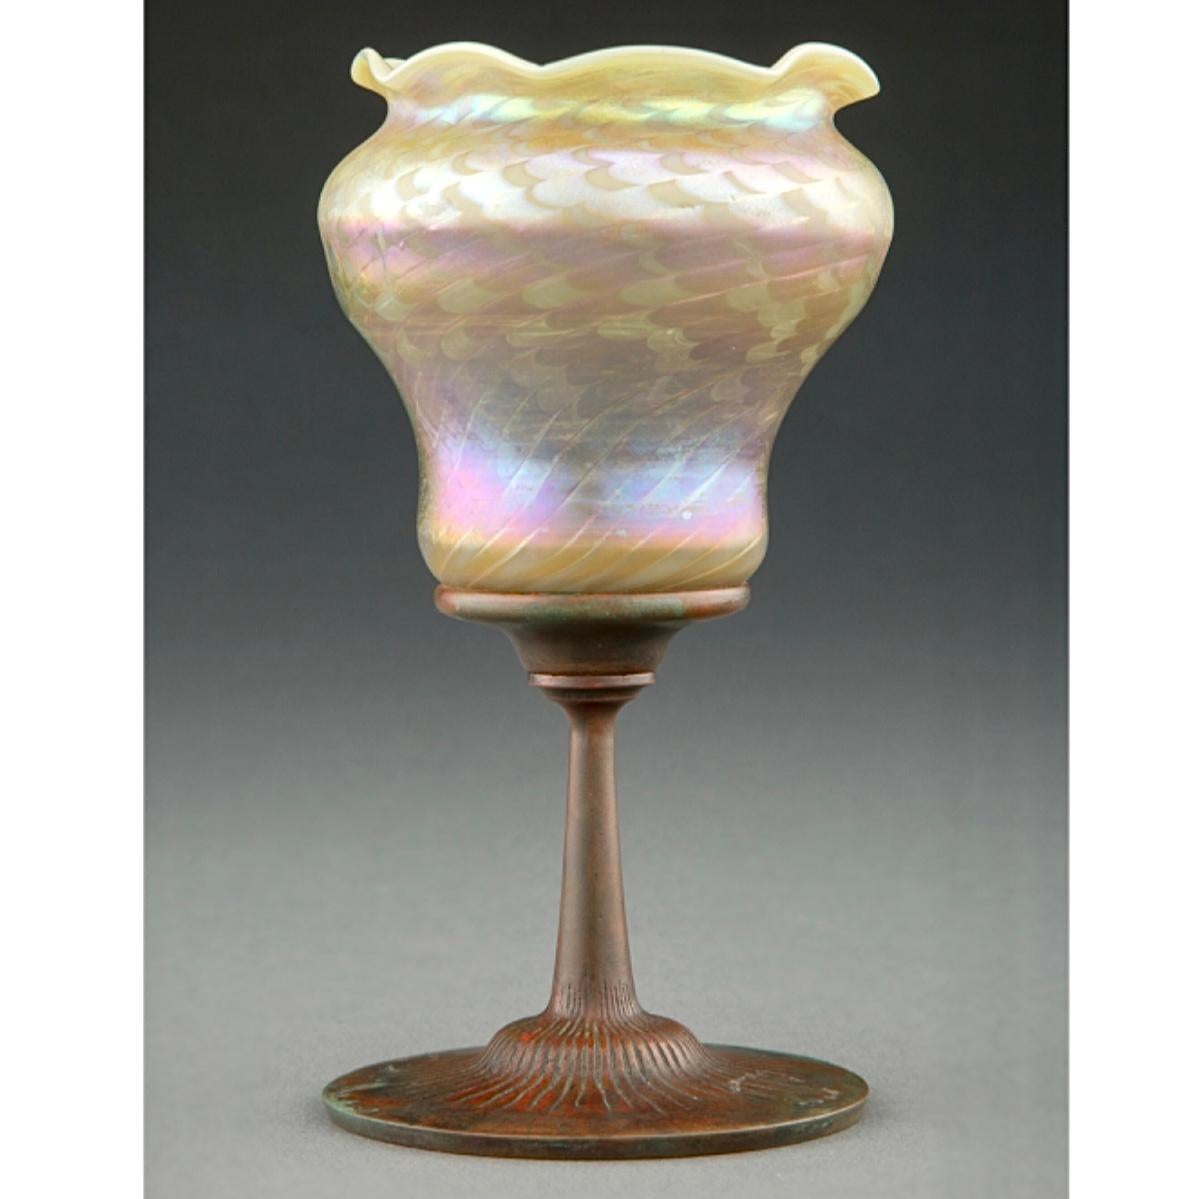 Tiffany studios Favrile Damascene glass and bronze vase, Art Nouveau circa 1900

A very rare and early Tiffany Studios Damascene favrile glass and bronze cup or decorated vase. I have been collecting and selling STNY items for over 20 years and have